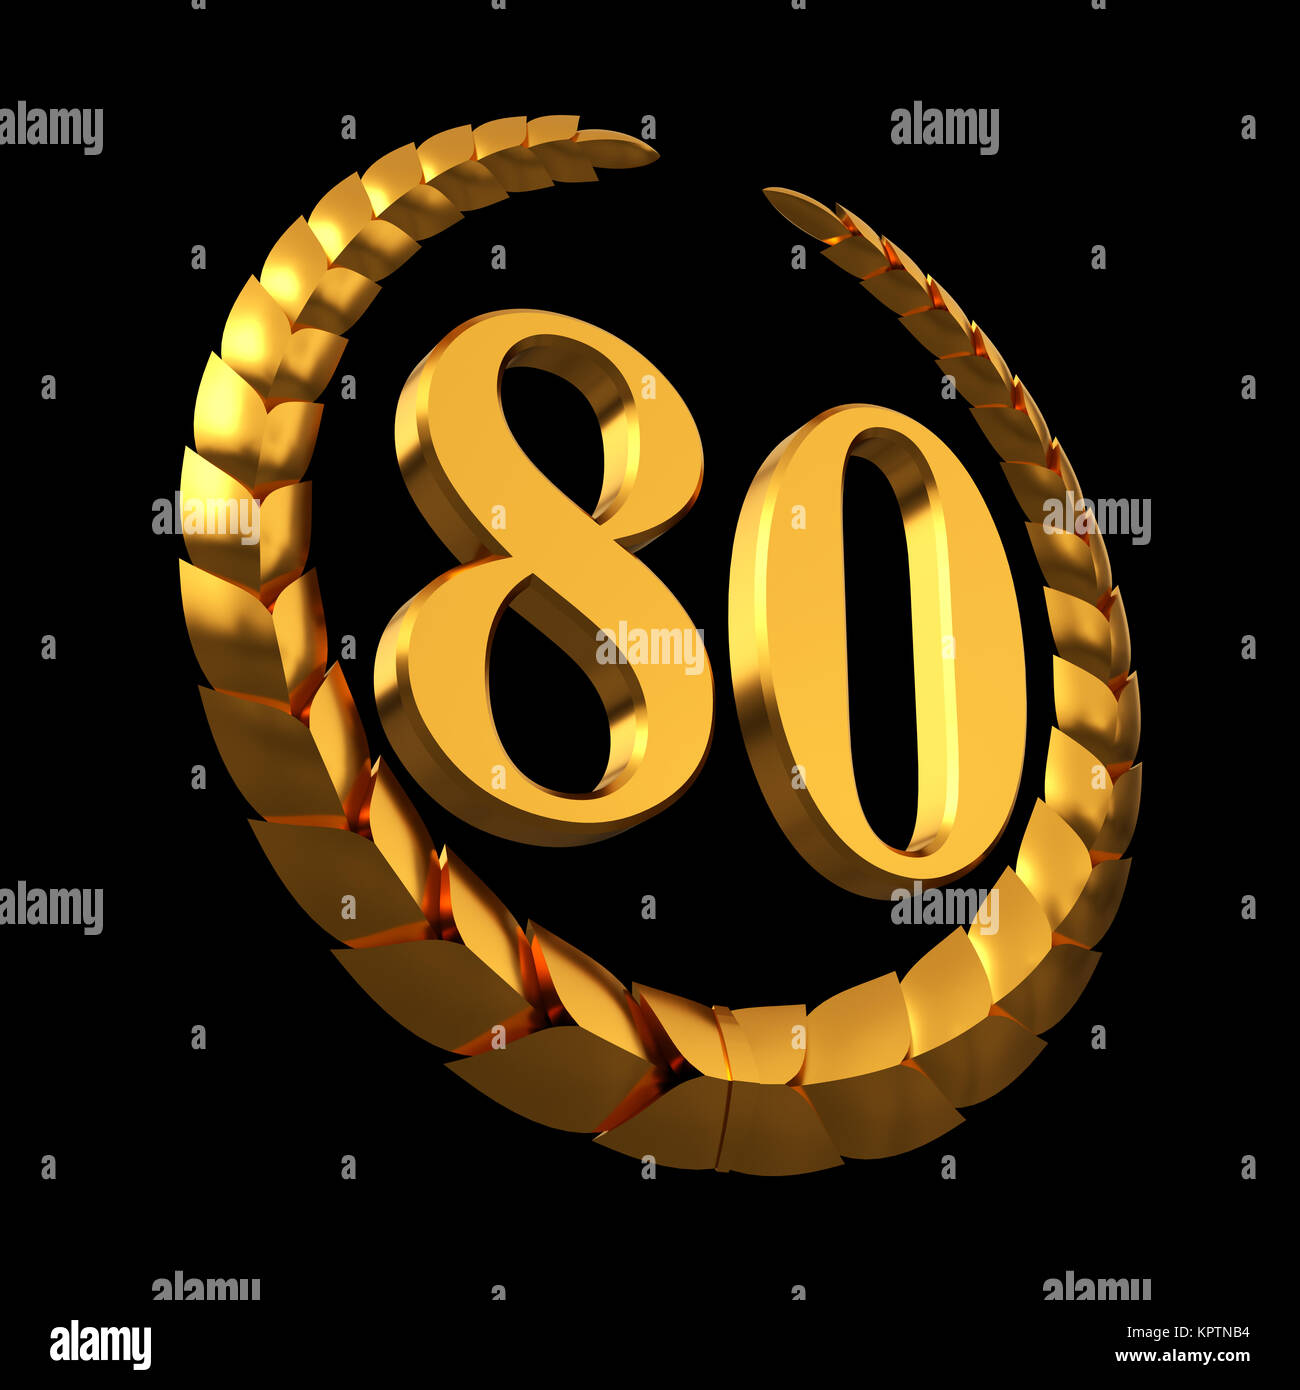 Anniversary Golden Laurel Wreath And Numeral 80 On Black Background Stock Photo